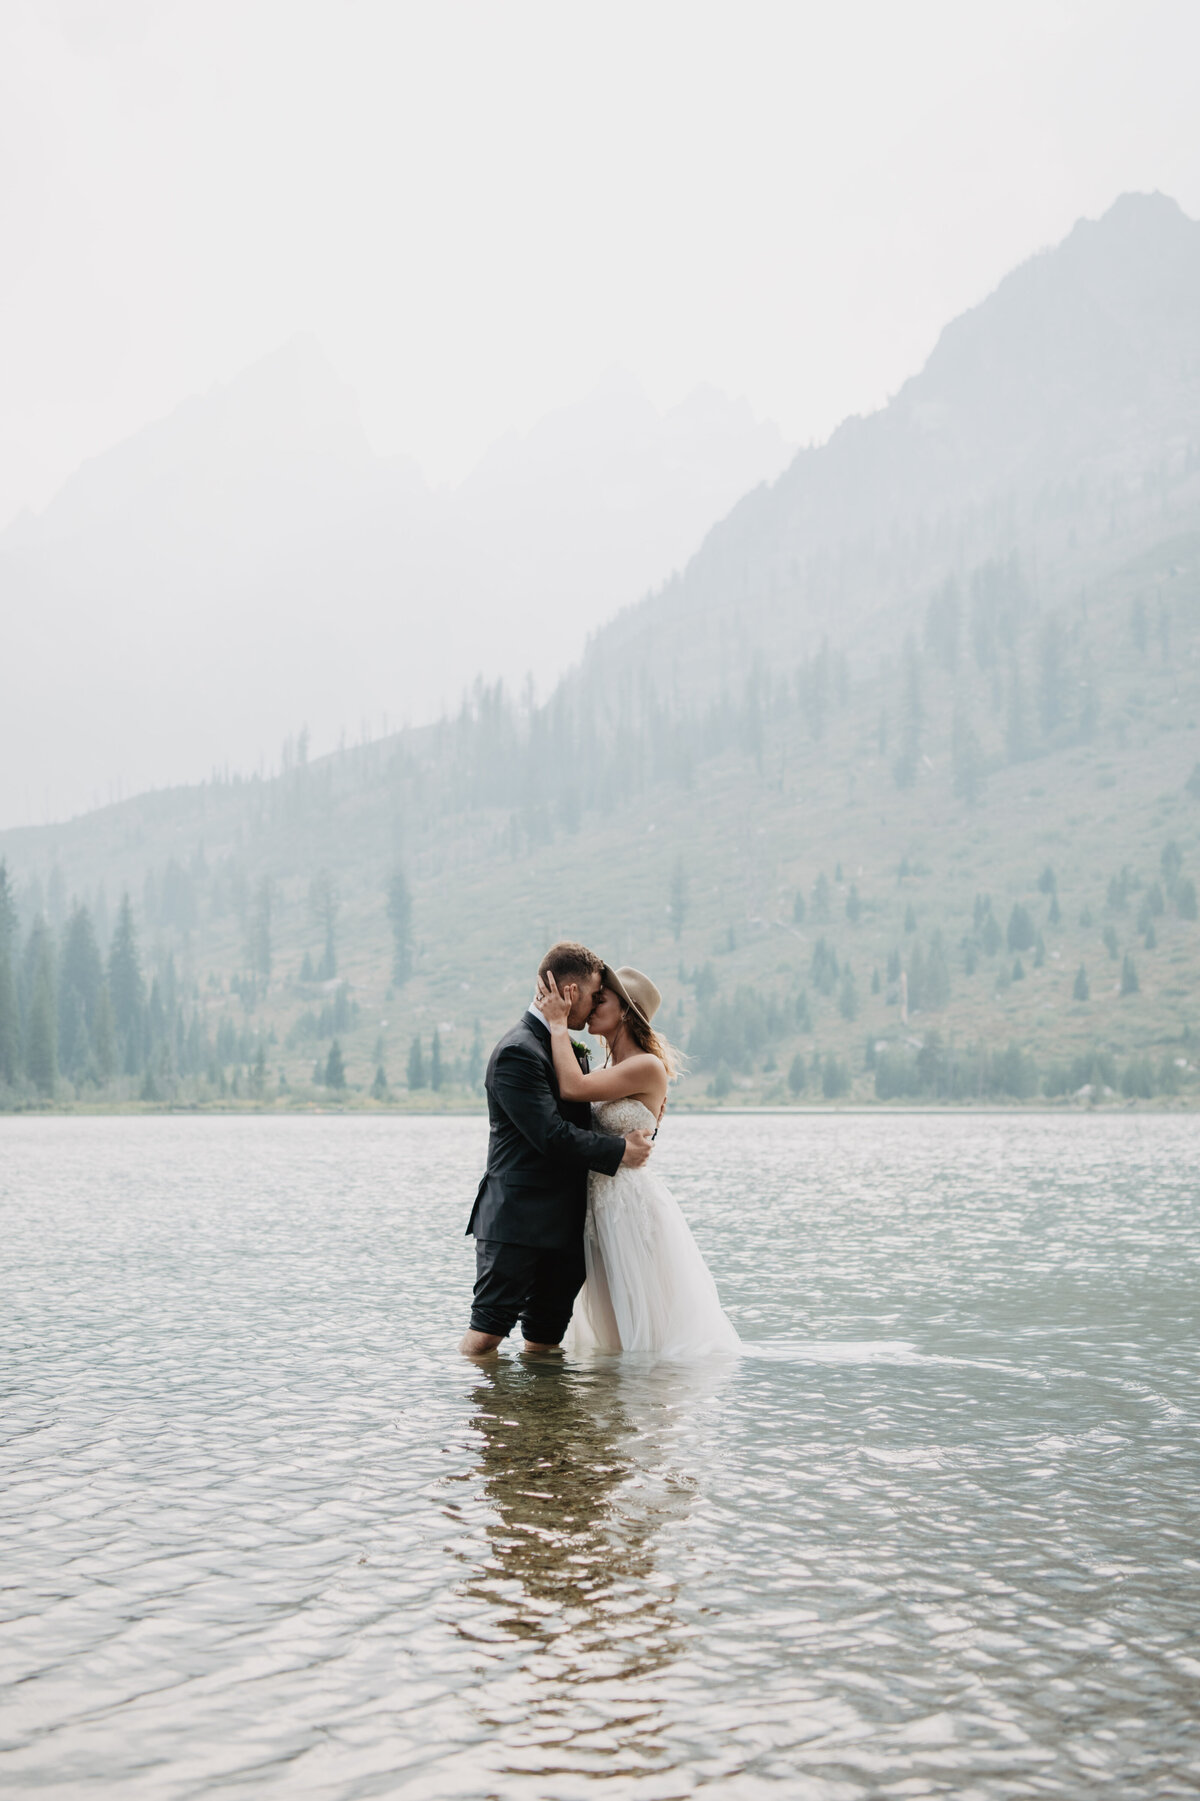 Jackson Hole Photographers capture bride and groom kissing in water